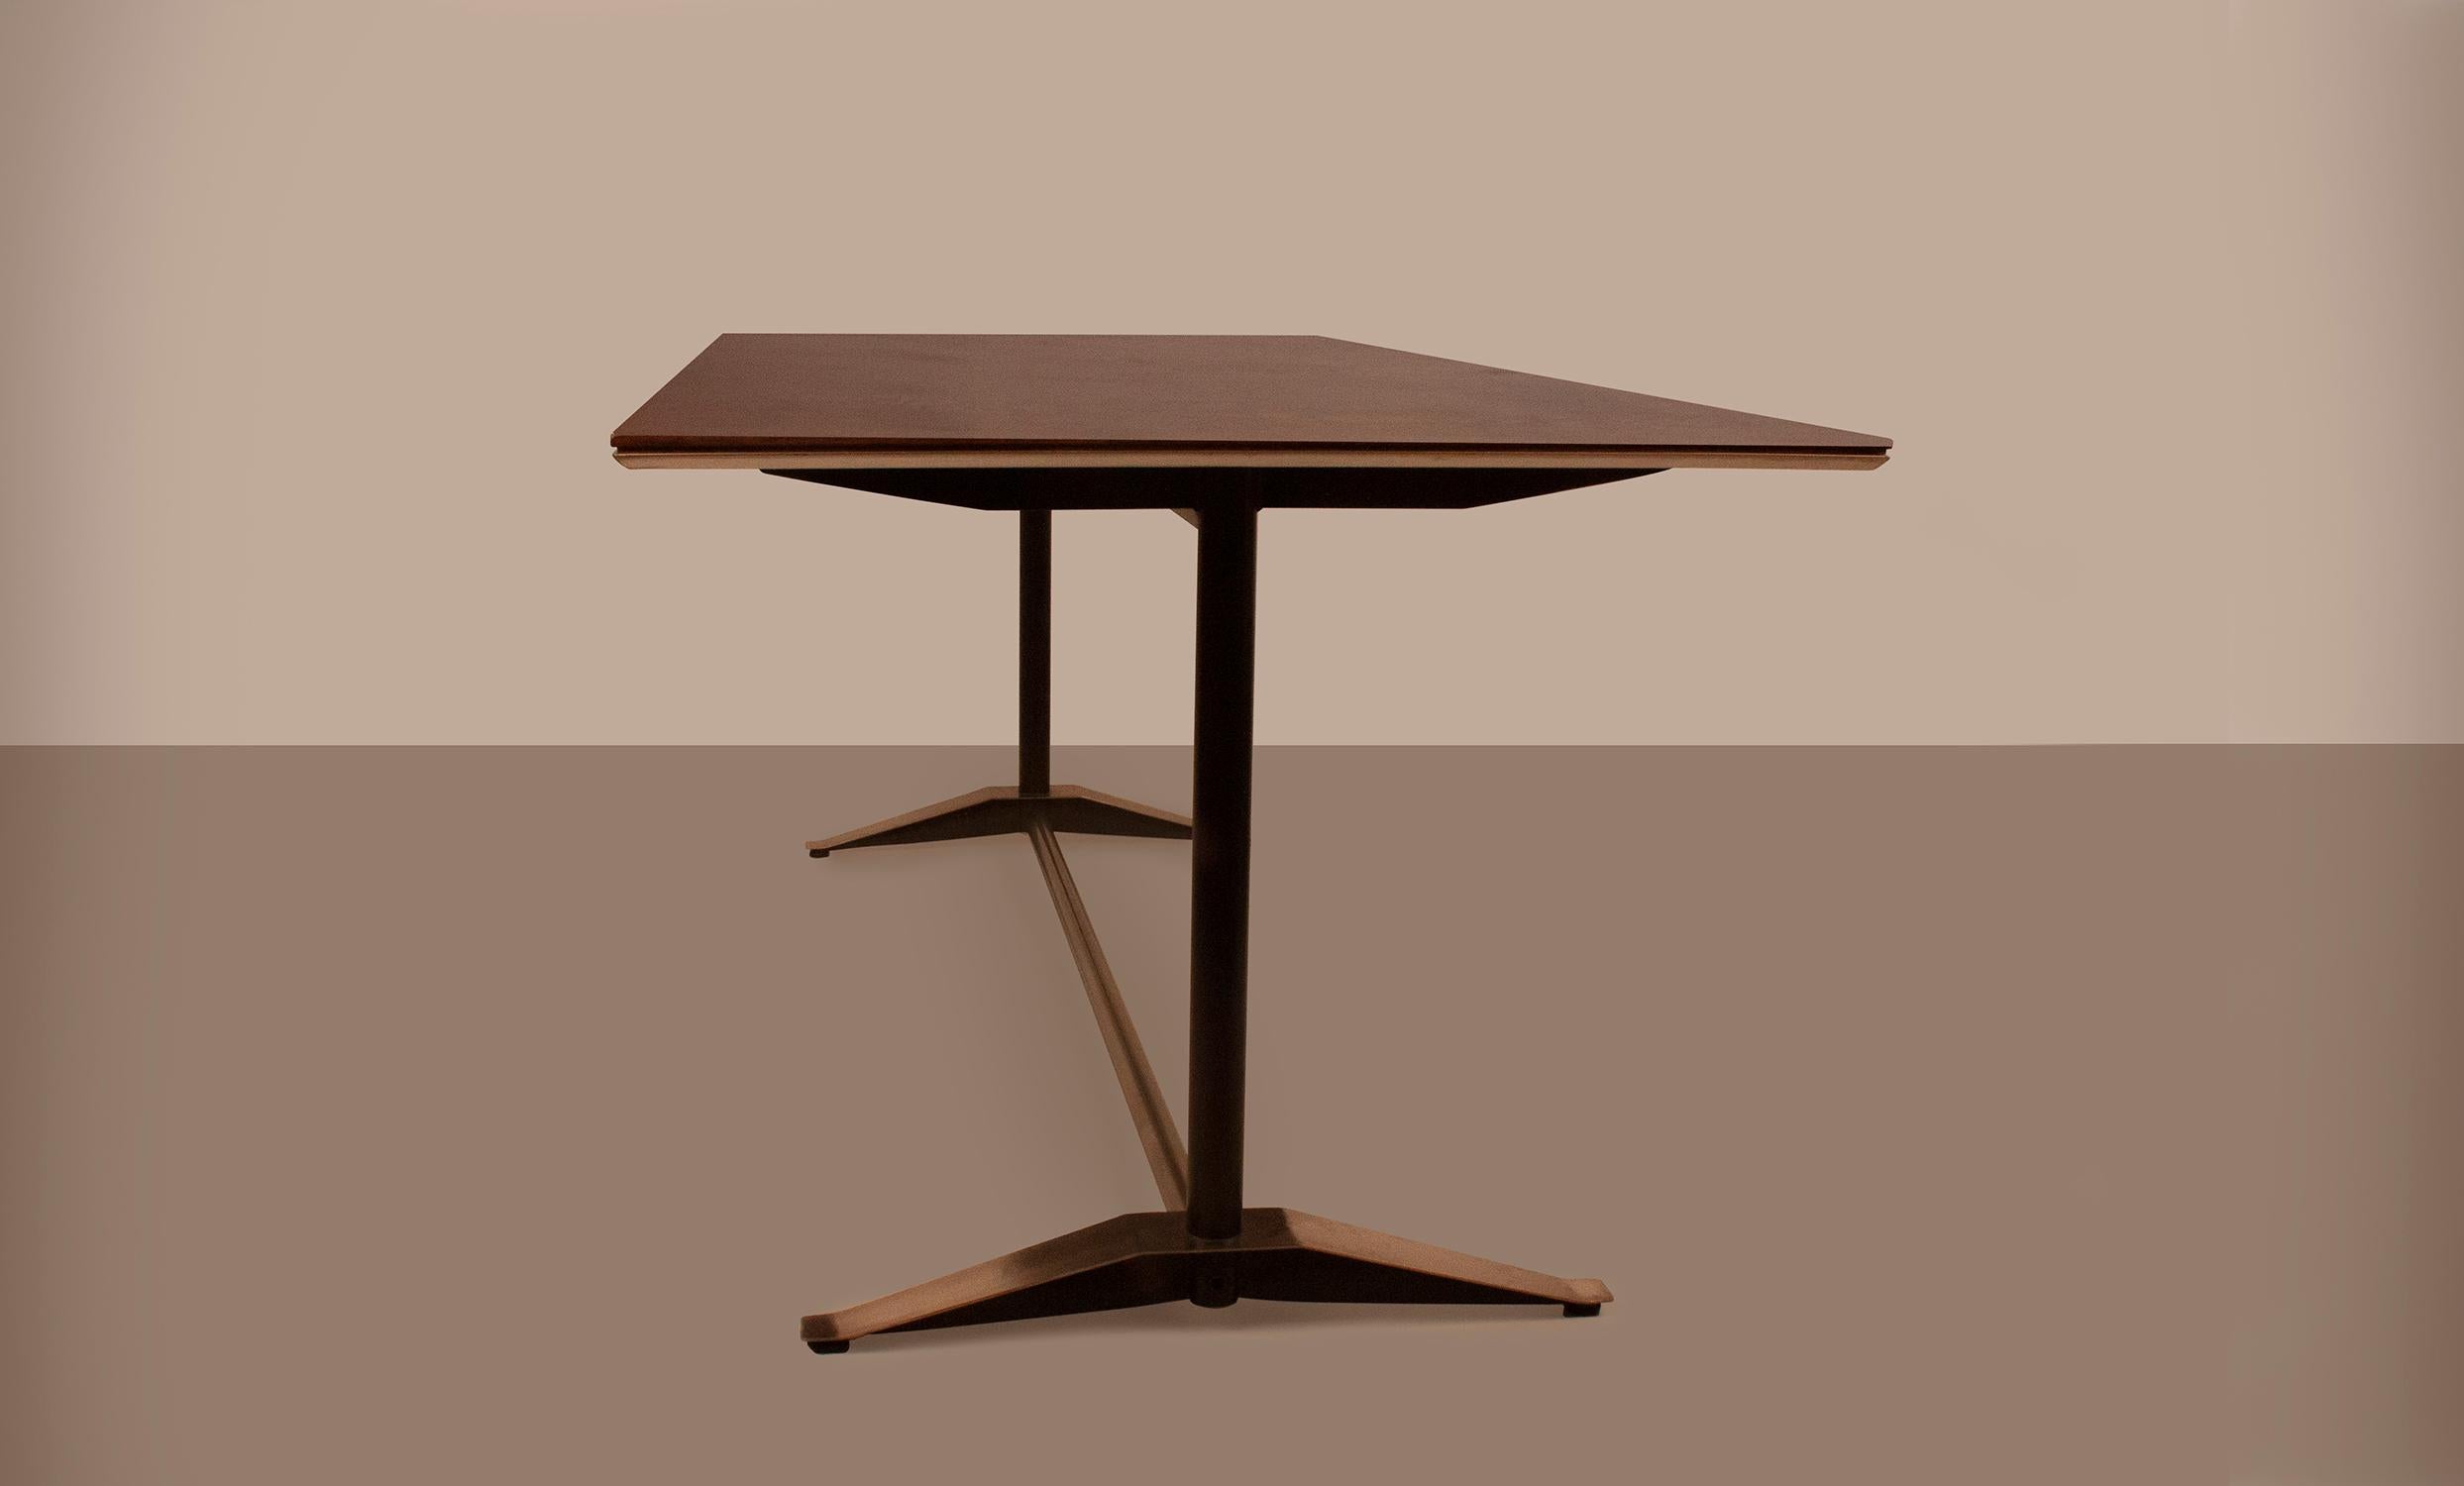 Dining table designed in 1960 by italian architect Alberto Rosselli for Arflex, Italy. Wenge wood, brushed aluminium, chromed and black lacquered steel. 
Alberto Roselli's design style is characterized by the combination of clean shapes and